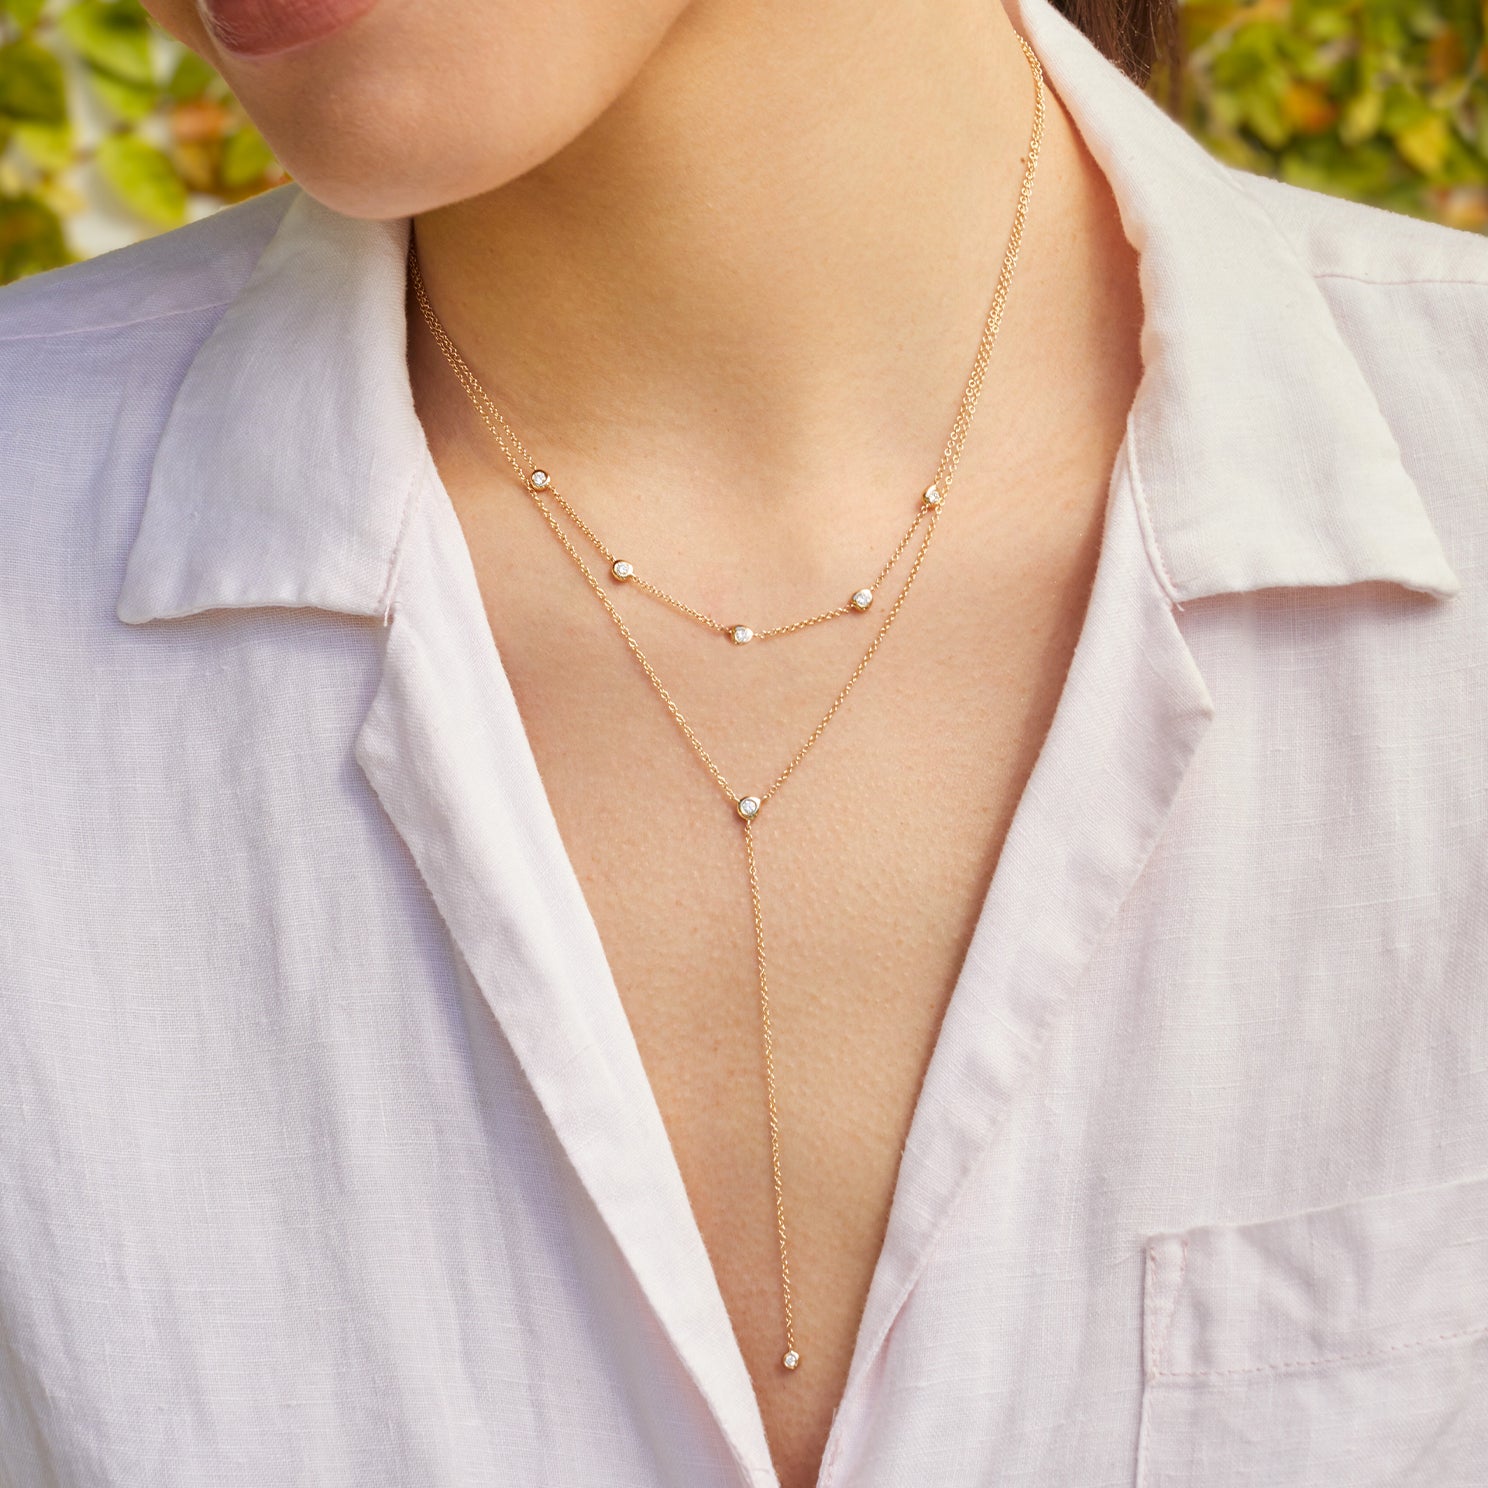 Diamond Pillow Lariat Necklace in 14k yellow gold styled on neck of model with layered necklace